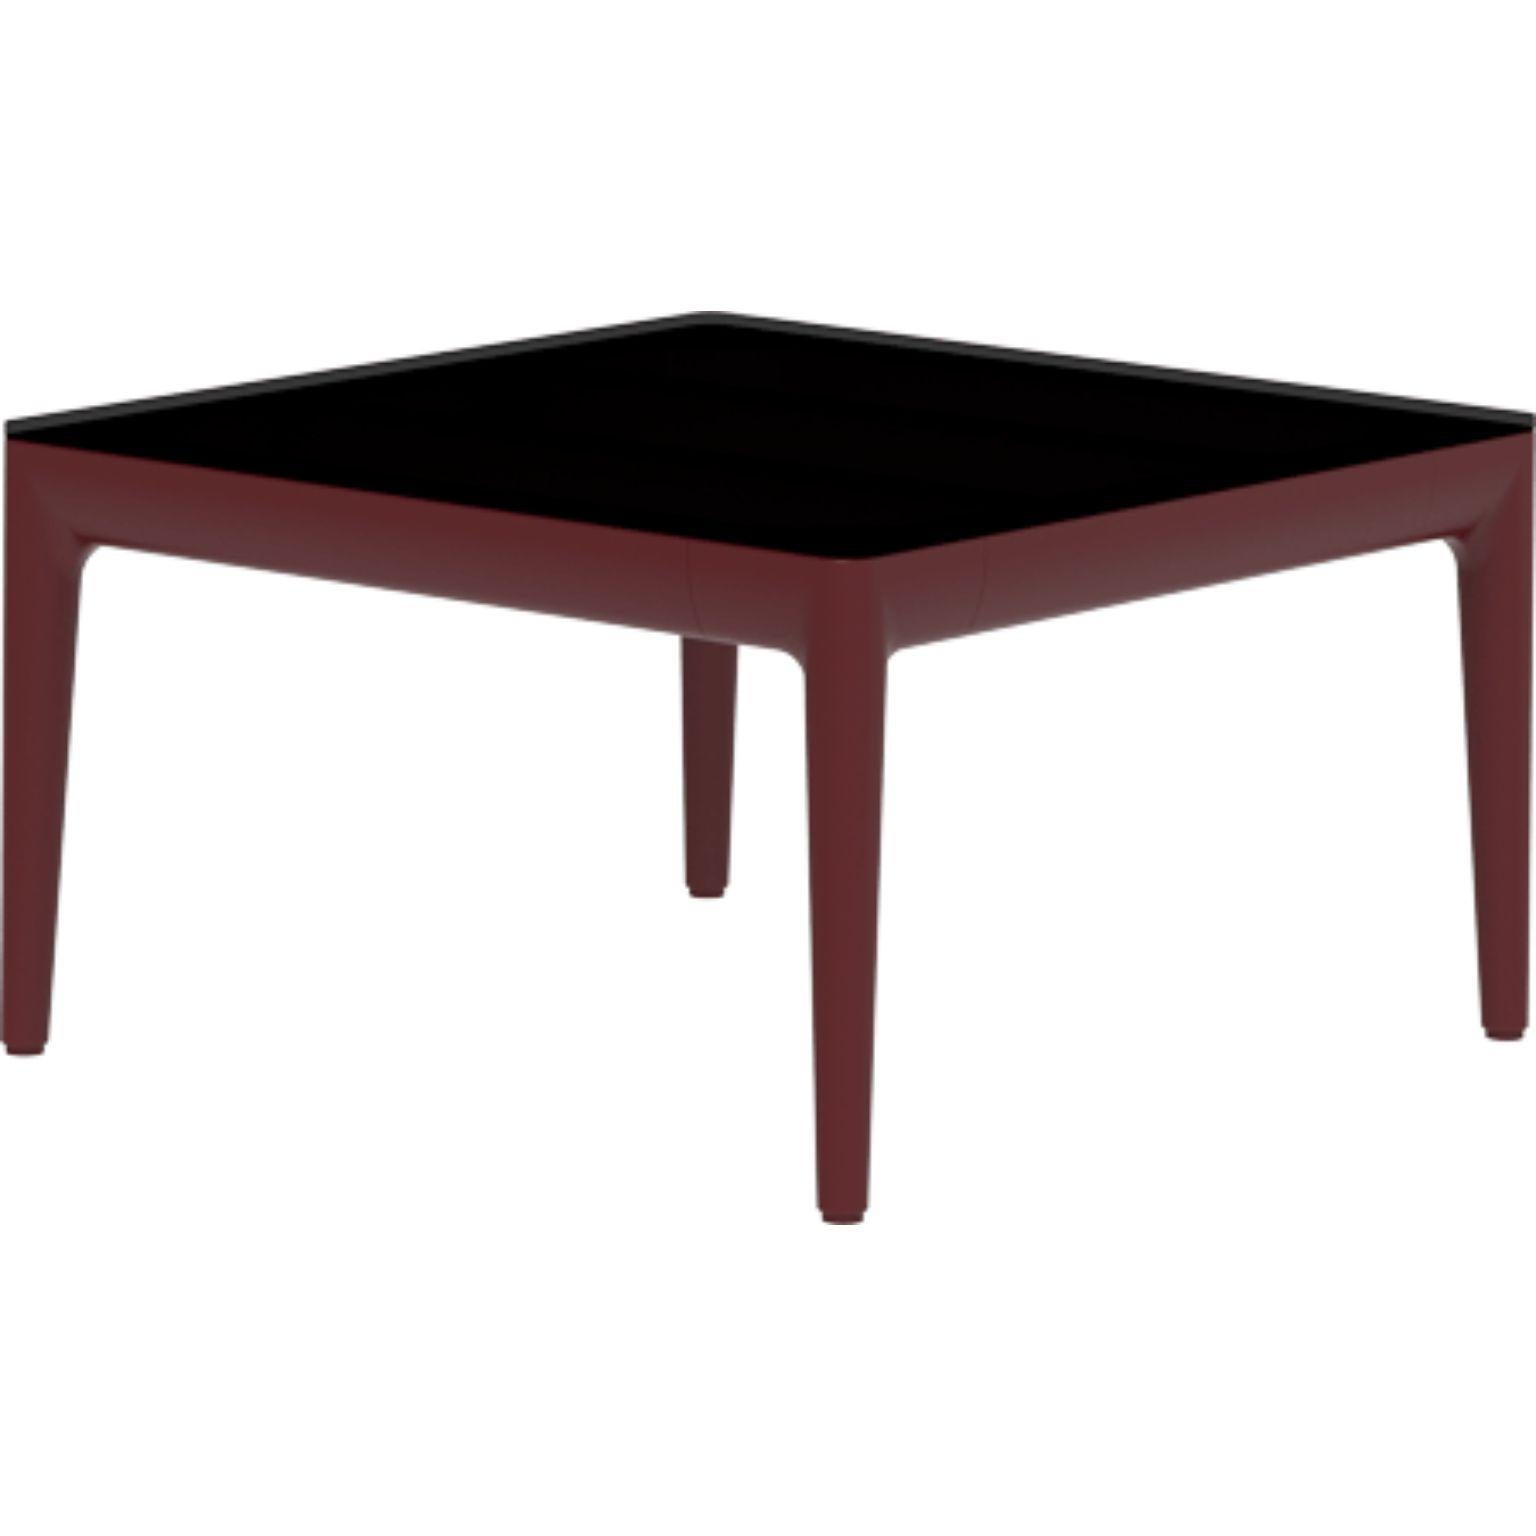 Ribbons Burgundy coffee table 50 by MOWEE
Dimensions: D50 x W50 x H29 cm
Material: Aluminum and HPL top.
Weight: 8 kg.
Also available in different colors and finishes. (HPL Black Edge or Neolith top). 

An unmistakable collection for its